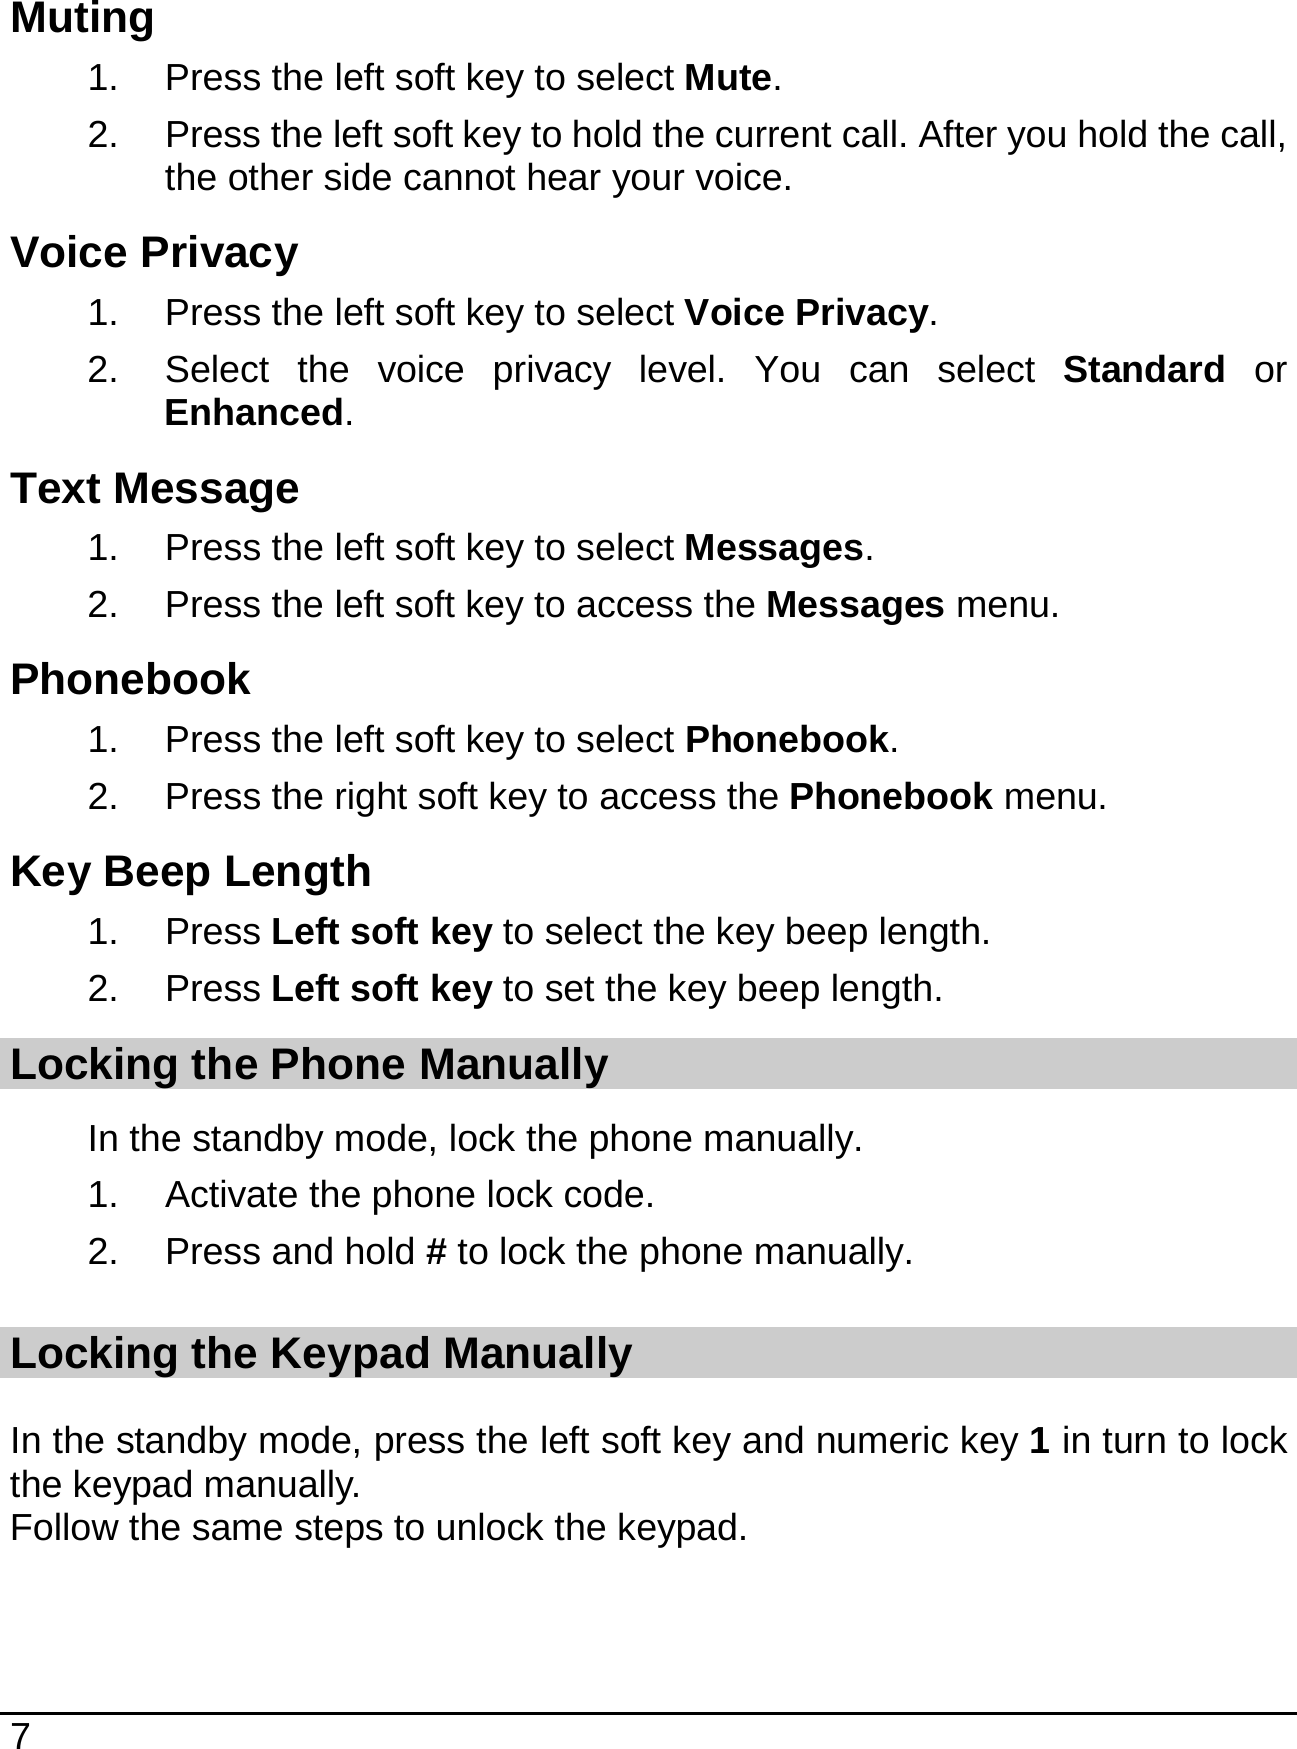   7  Muting 1.  Press the left soft key to select Mute. 2.  Press the left soft key to hold the current call. After you hold the call, the other side cannot hear your voice. Voice Privacy 1.  Press the left soft key to select Voice Privacy. 2.  Select the voice privacy level. You can select Standard or Enhanced. Text Message 1.  Press the left soft key to select Messages. 2.  Press the left soft key to access the Messages menu. Phonebook 1.  Press the left soft key to select Phonebook. 2.  Press the right soft key to access the Phonebook menu. Key Beep Length 1. Press Left soft key to select the key beep length. 2. Press Left soft key to set the key beep length. Locking the Phone Manually In the standby mode, lock the phone manually. 1.  Activate the phone lock code. 2.  Press and hold # to lock the phone manually. Locking the Keypad Manually In the standby mode, press the left soft key and numeric key 1 in turn to lock the keypad manually. Follow the same steps to unlock the keypad.